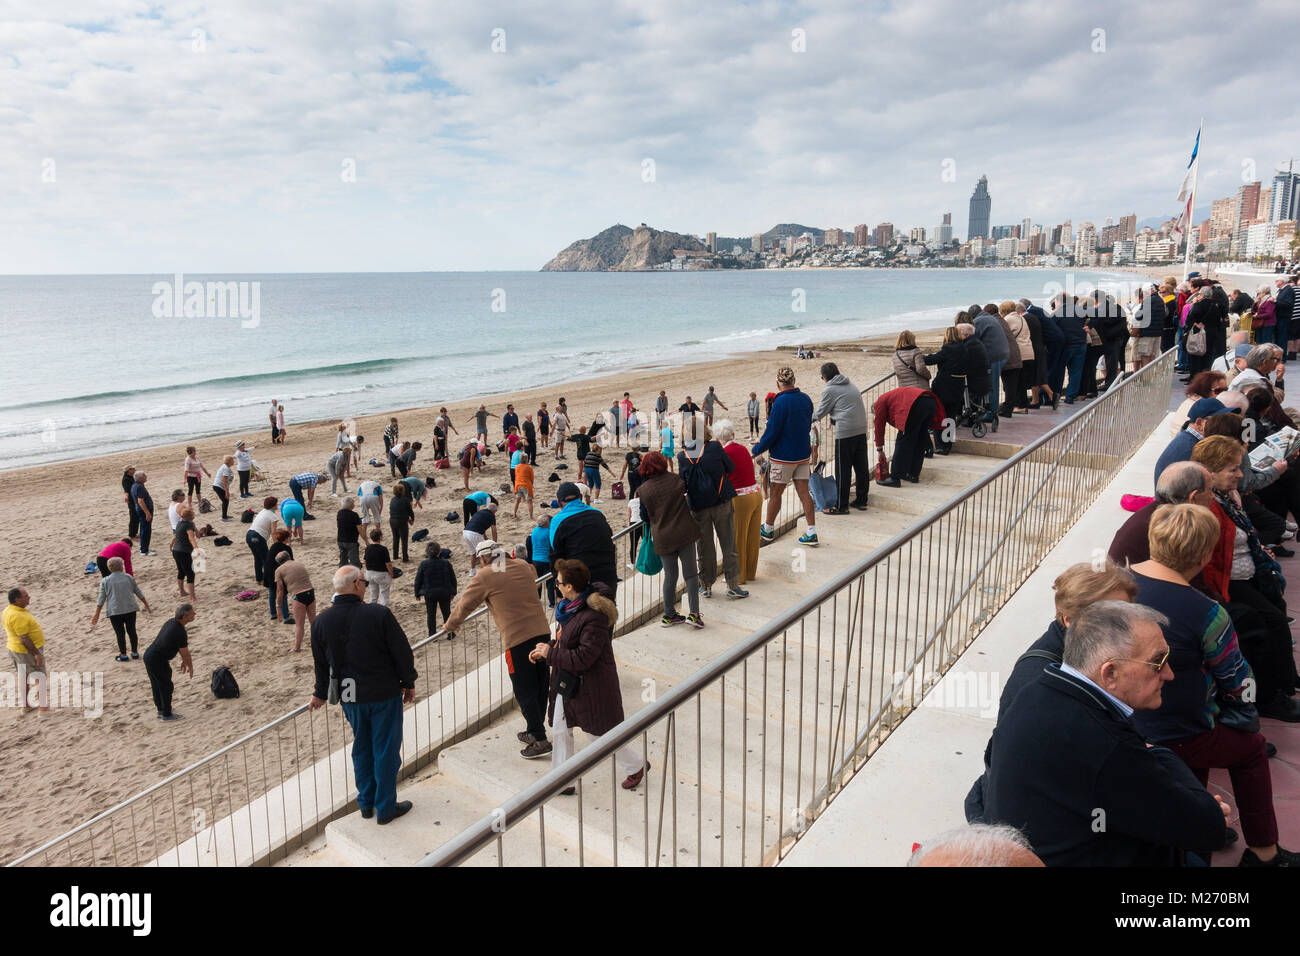 Seniors keeping fit on the beach in Benidorm, Spain. Men women oap's, elderly fitness class spectators watching and joining in. Stock Photo